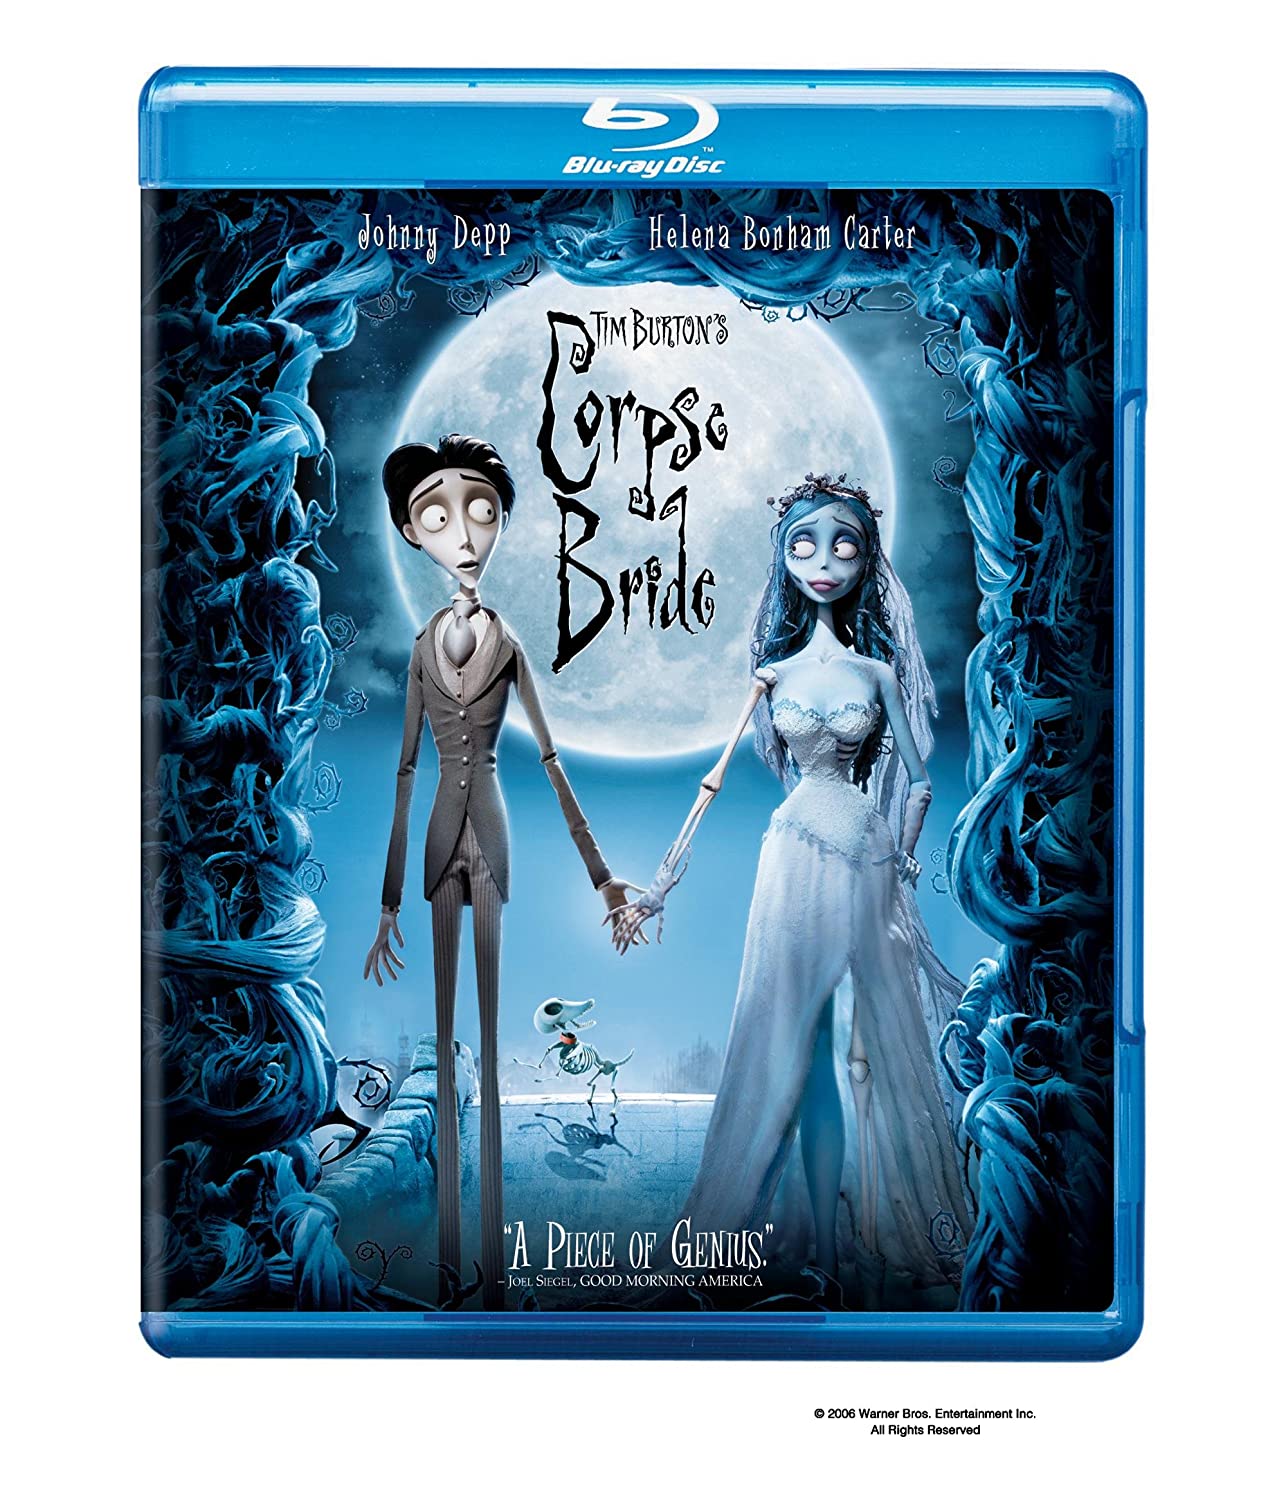 Corpse Bride - Blu-ray (Used Once)